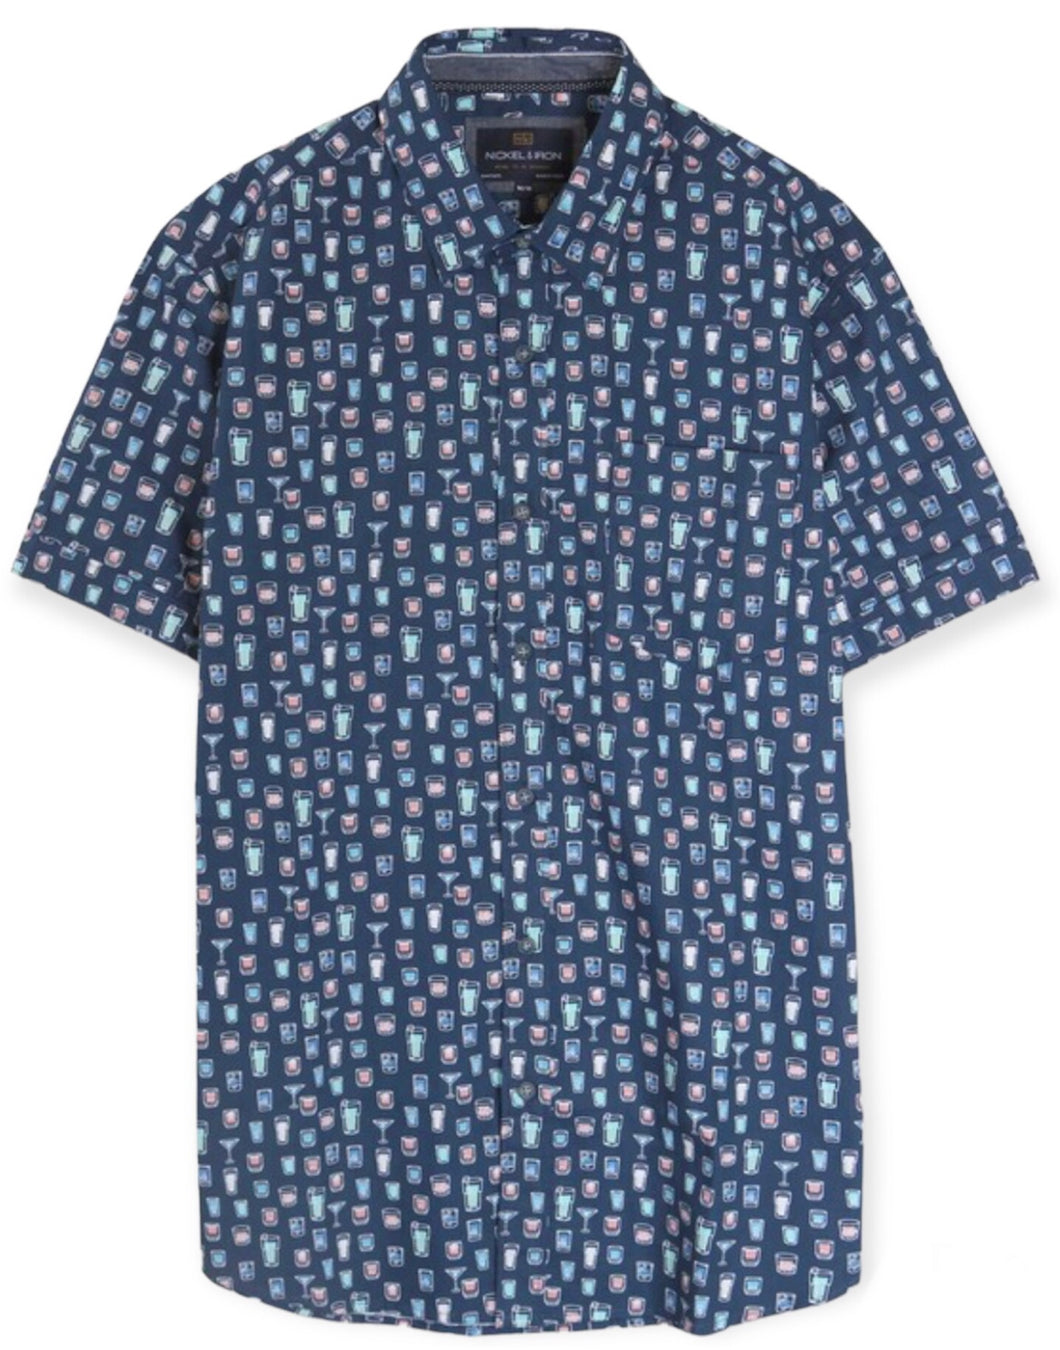 Aaron's Mixed Drinks Shirt- Ensign Blue